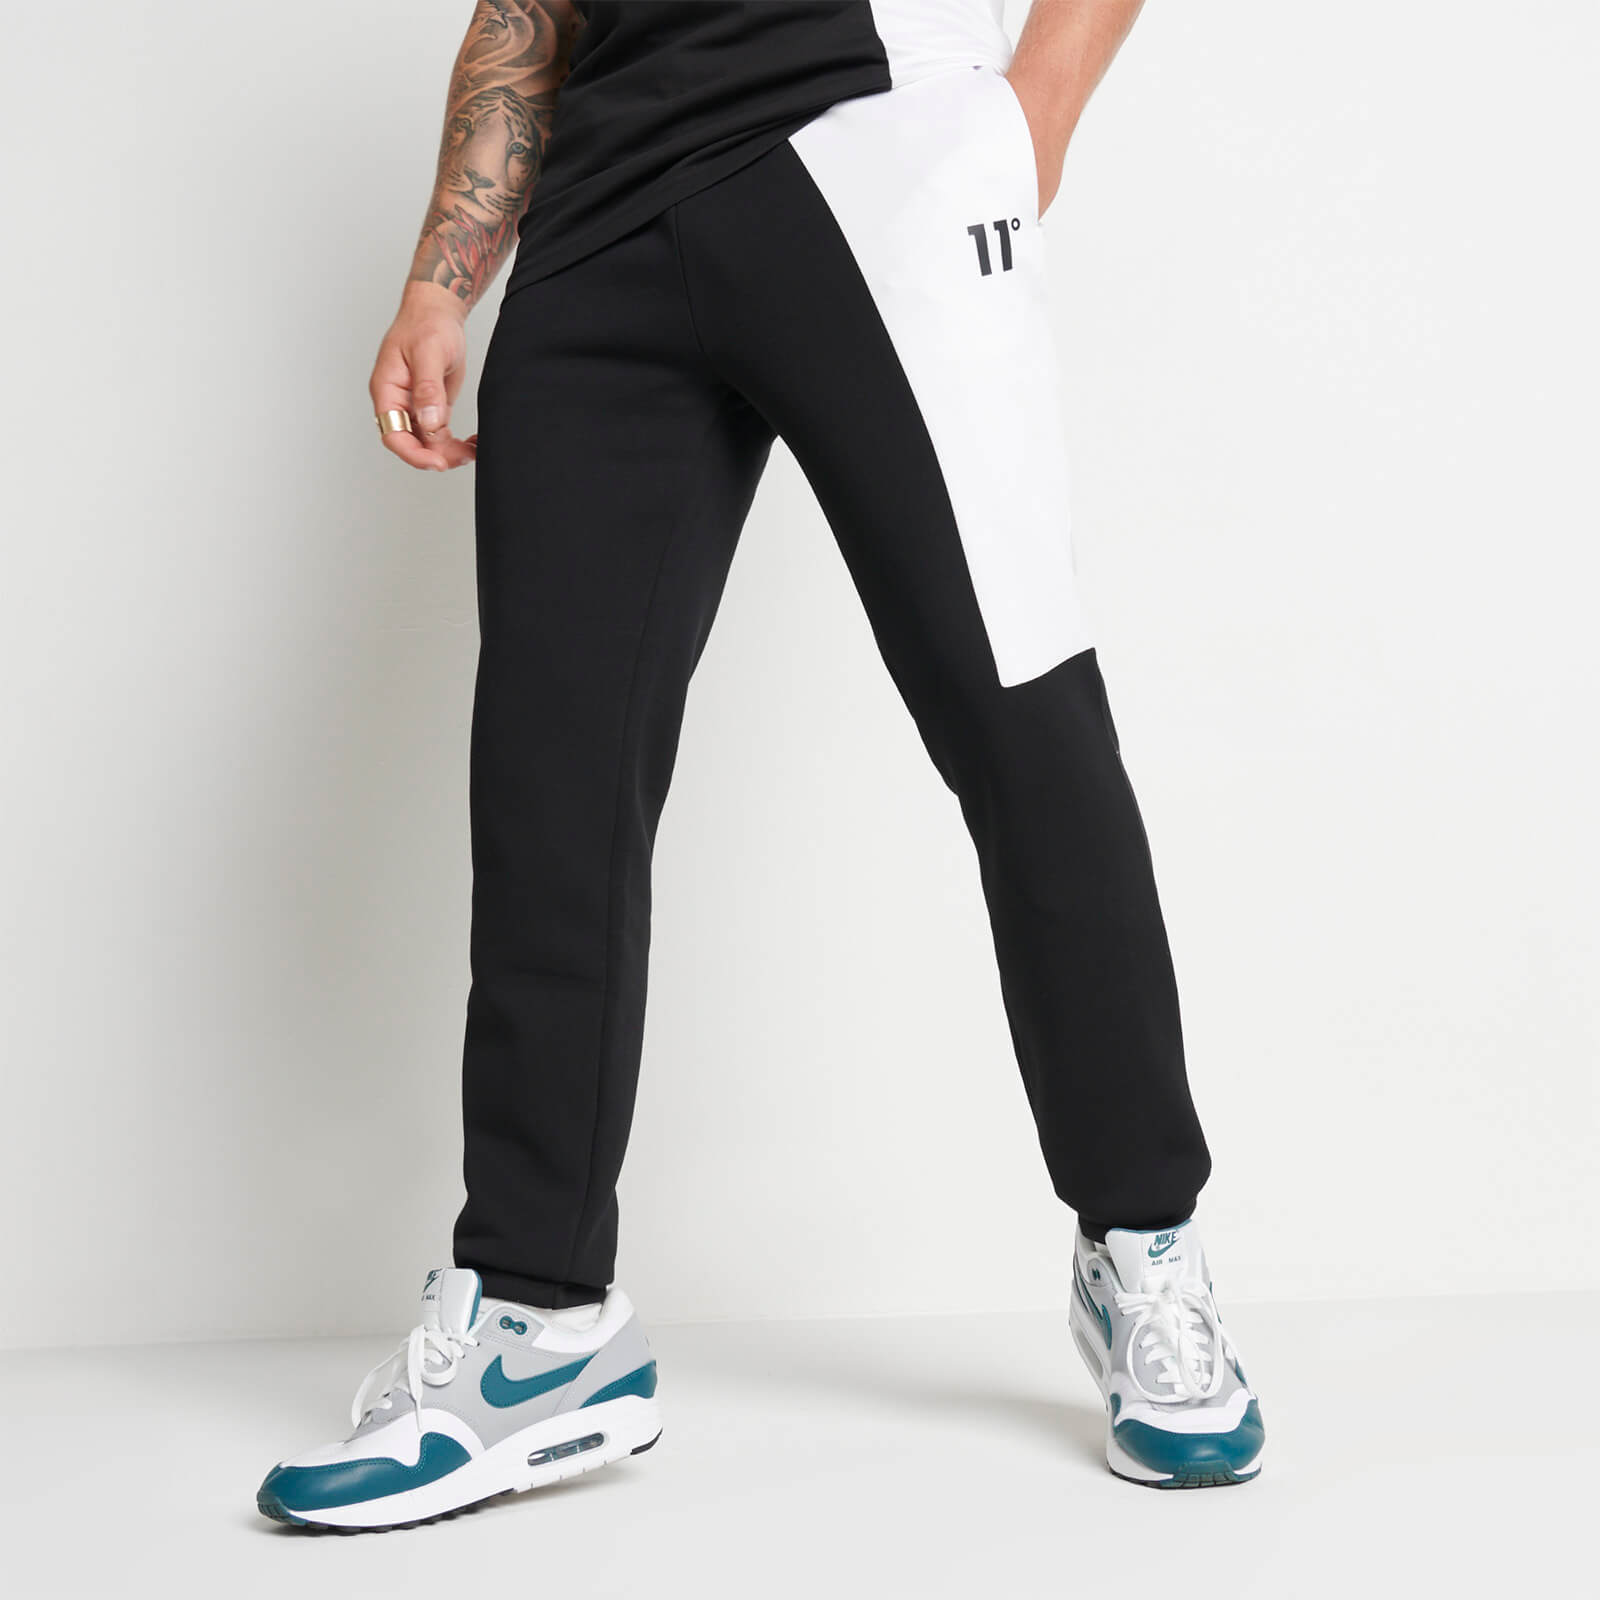 11 Degrees Mixed Fabric Cut And Sew Joggers Regular Fit – Black / White |  11 Degrees